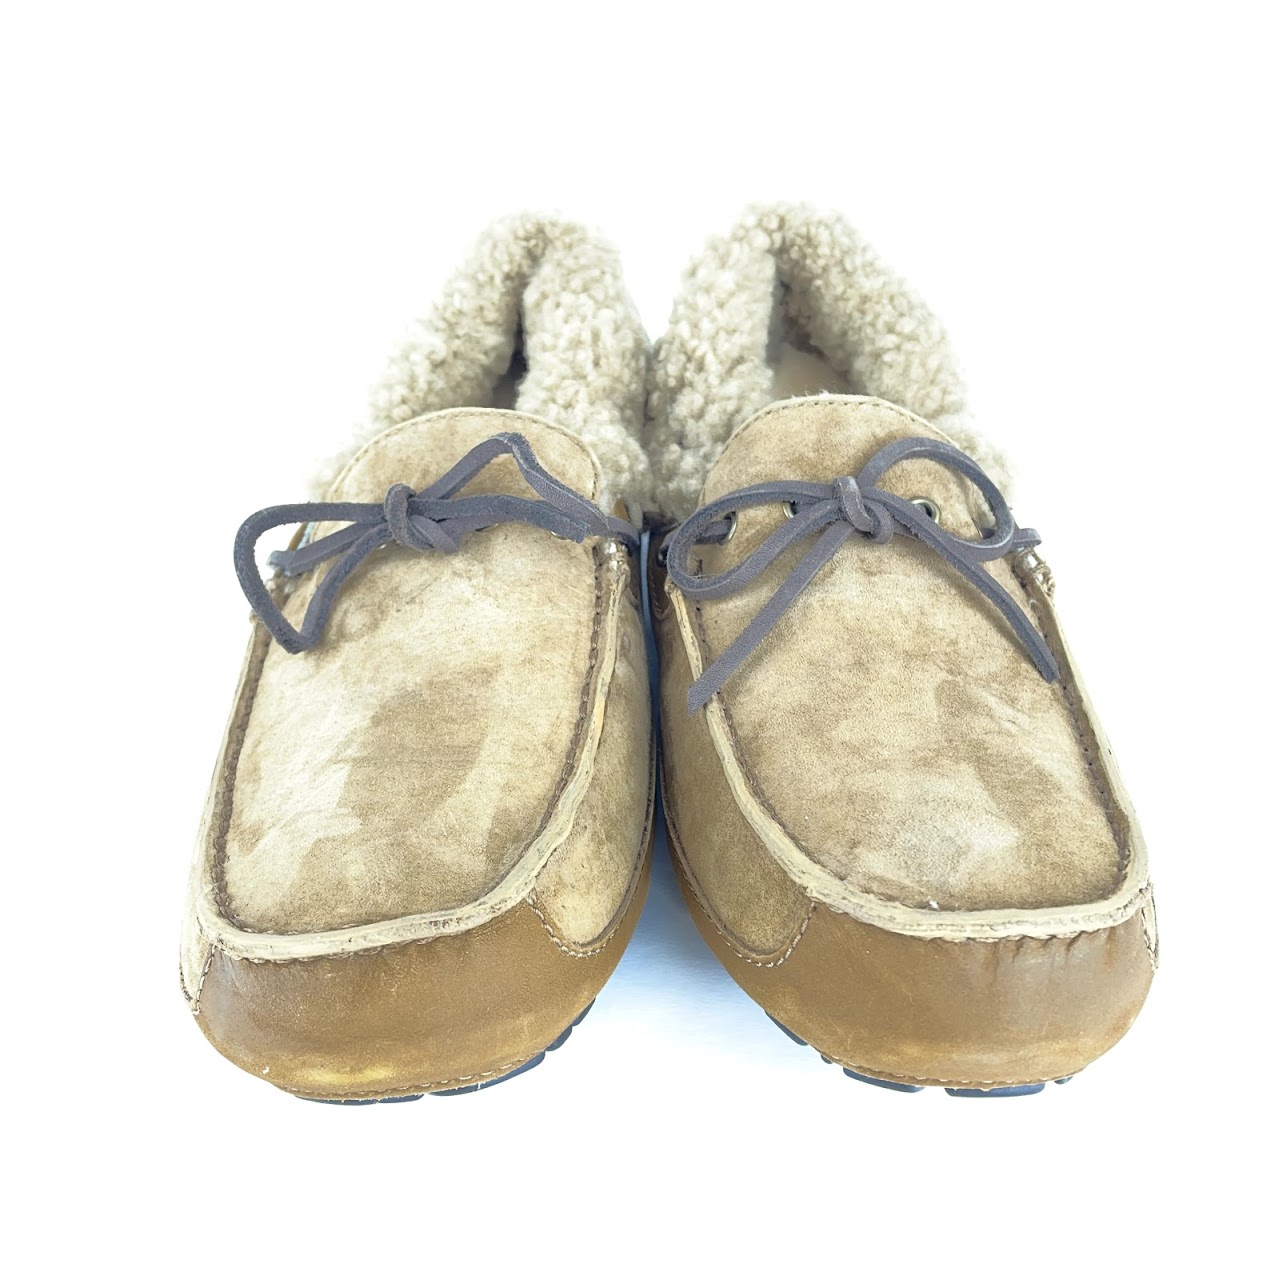 UGG New Moccasin Loafers